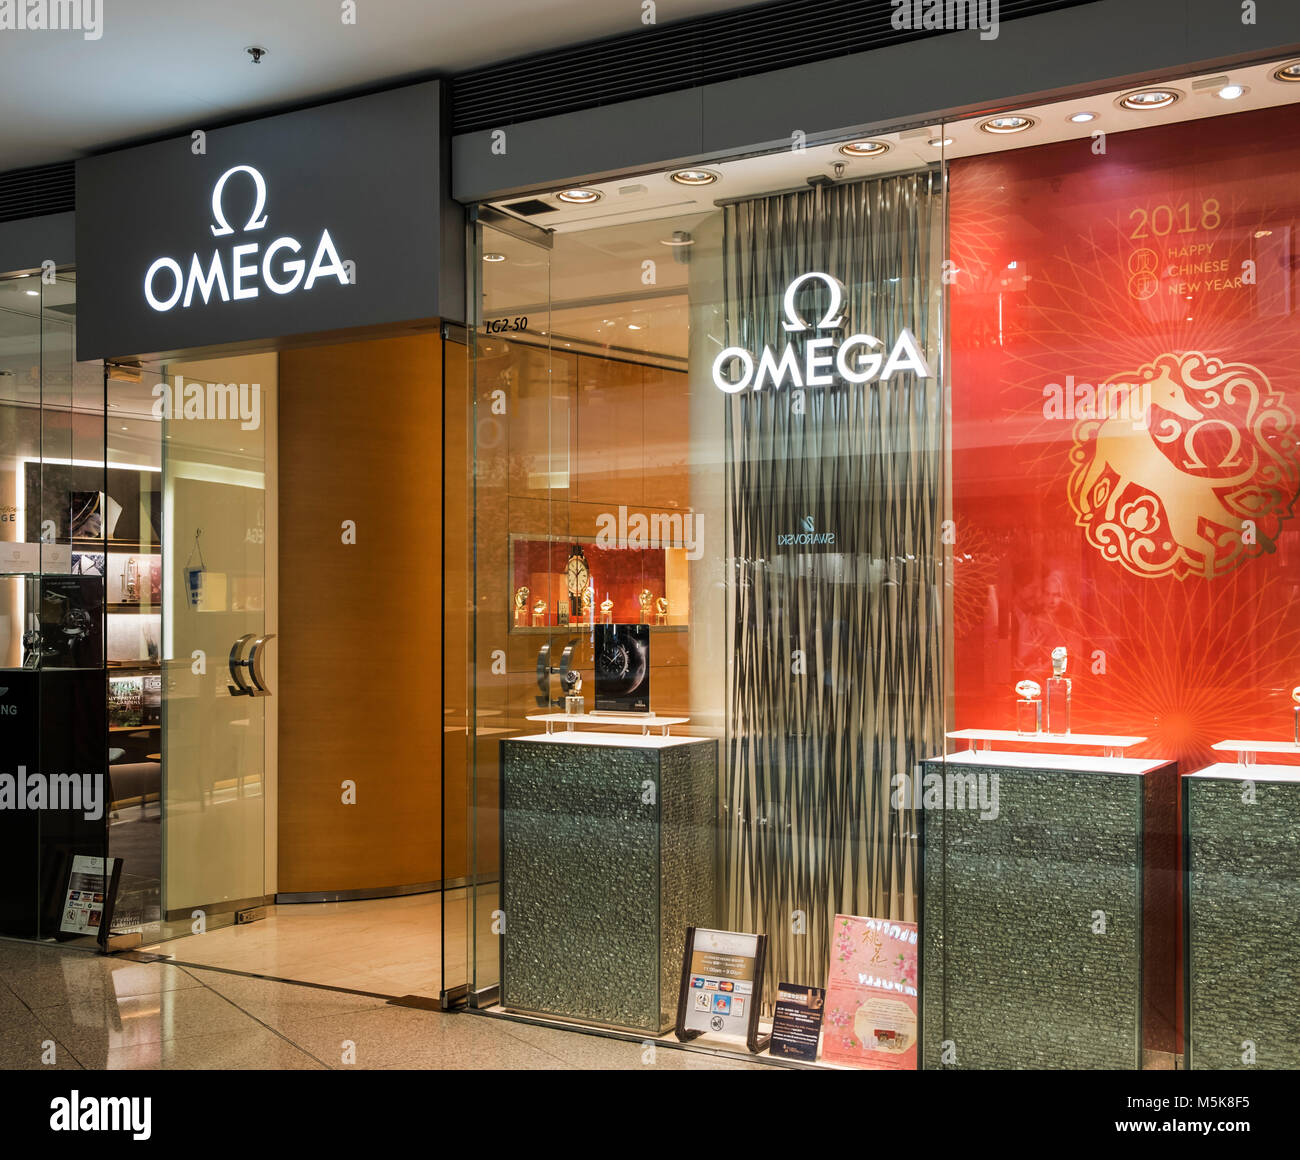 omega's department store